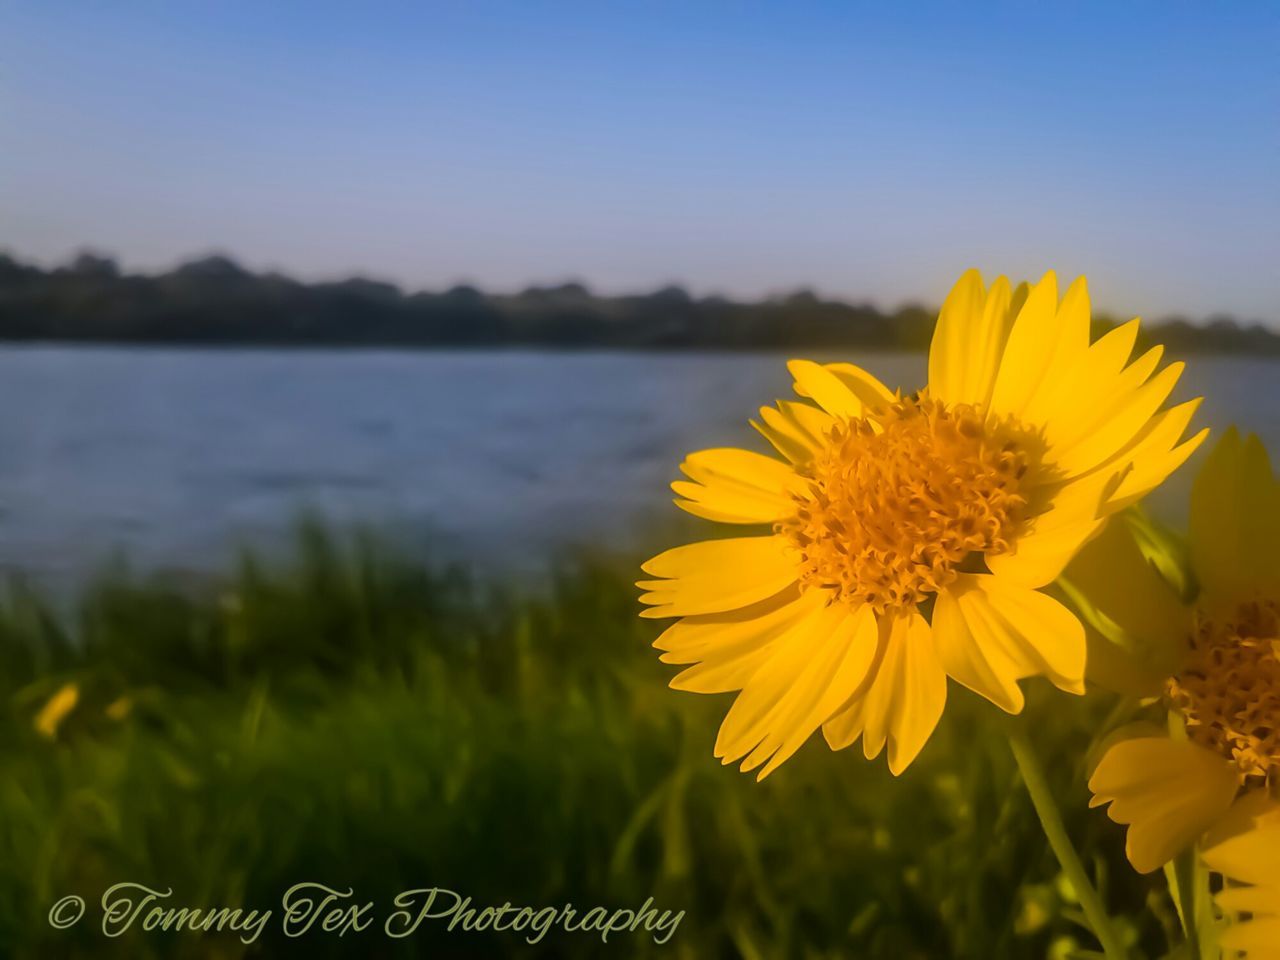 flower, yellow, nature, beauty in nature, growth, no people, petal, fragility, outdoors, field, plant, freshness, tranquility, scenics, flower head, close-up, sunset, day, sky, blooming, crocus